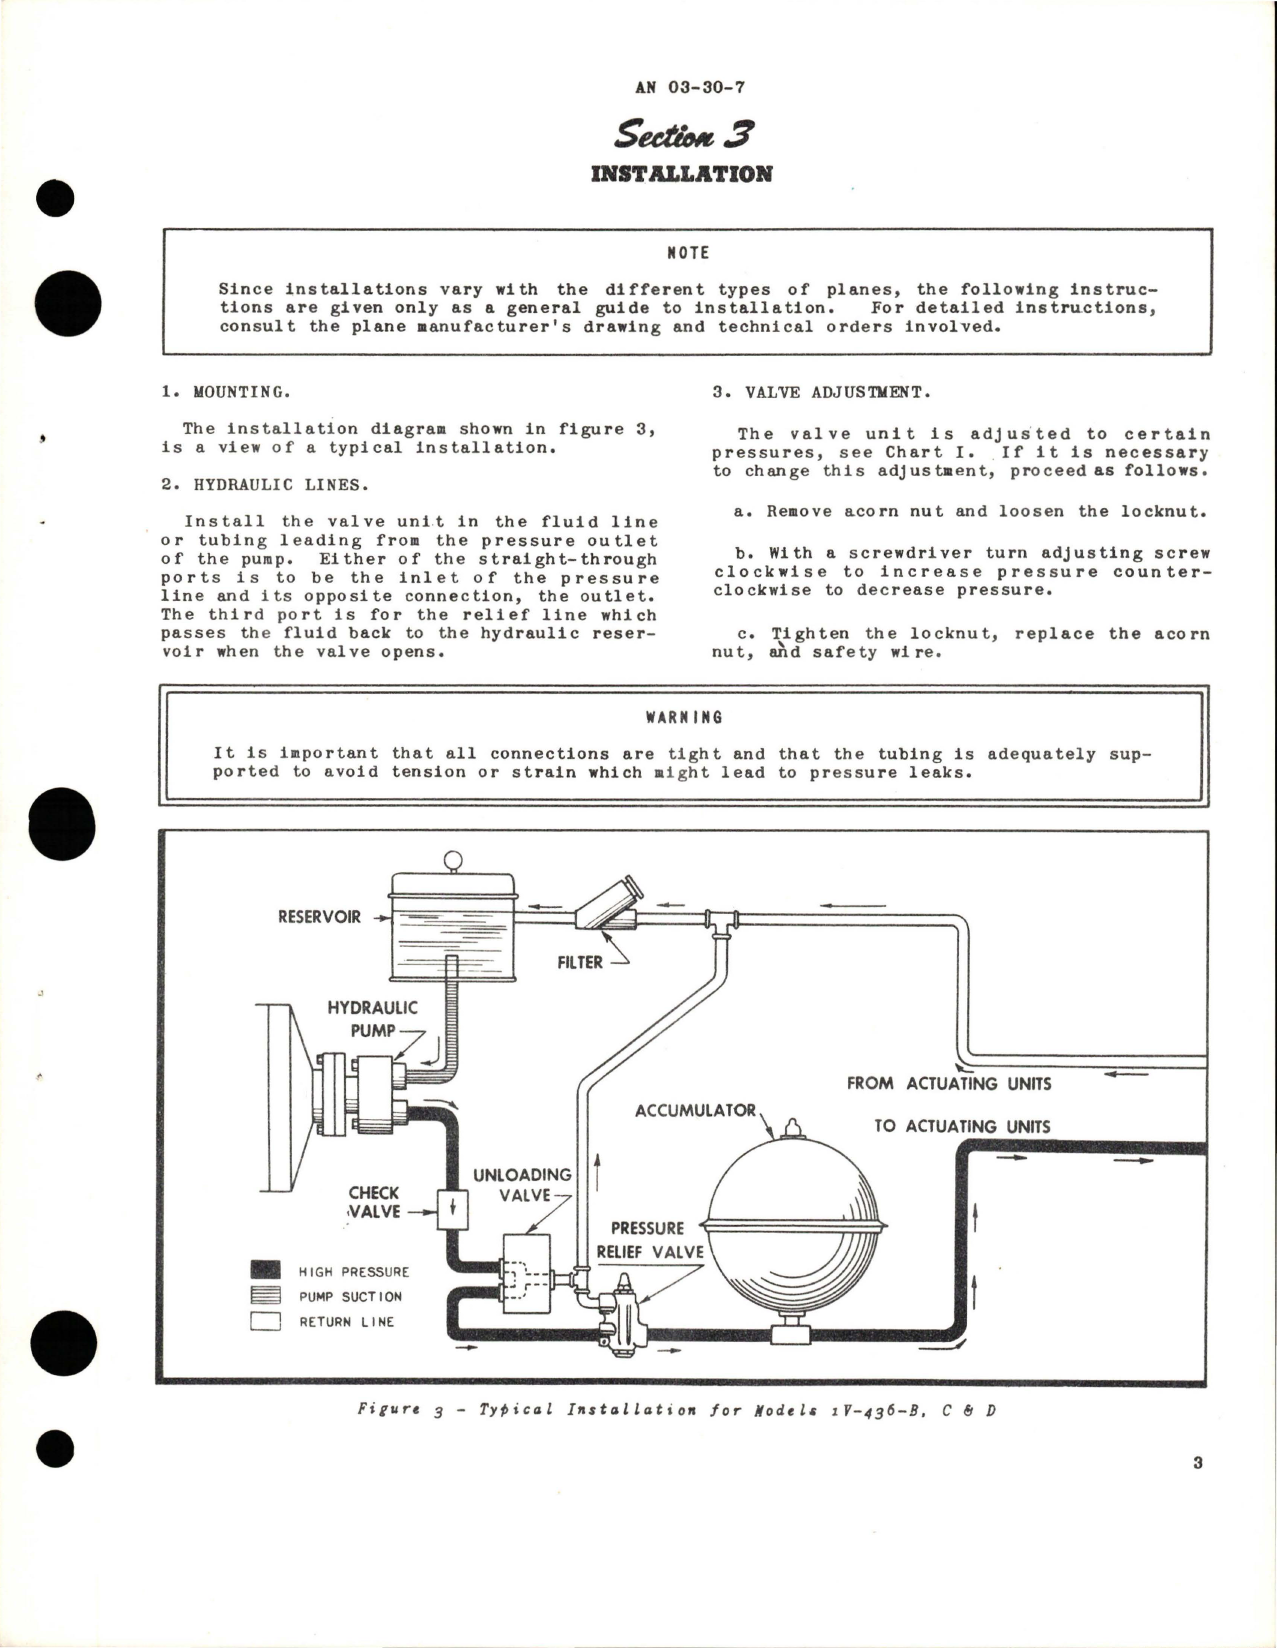 Sample page 7 from AirCorps Library document: Operation, Service and Overhaul Instructions with Parts Catalog for Pesco Hydraulic Relief Valve